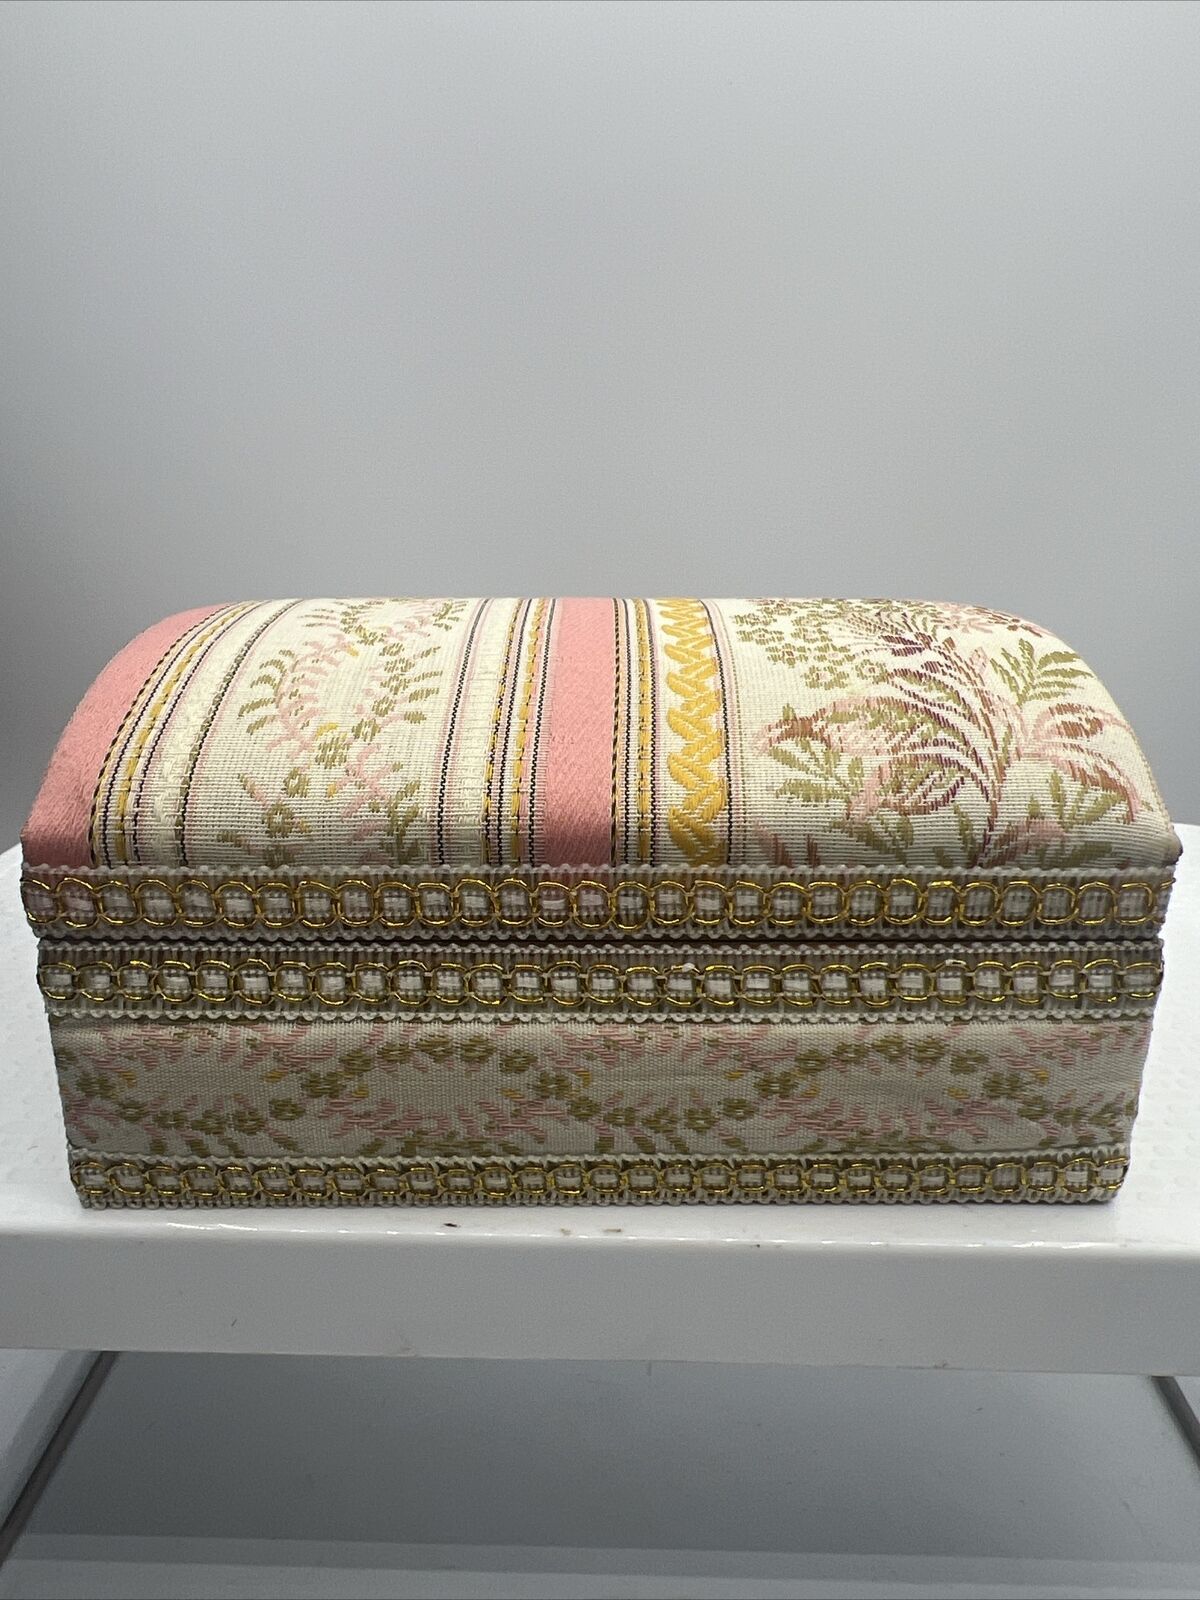 Schmid Jewelry Box Fabric Cloth Covered Vintage Tapestry Padded